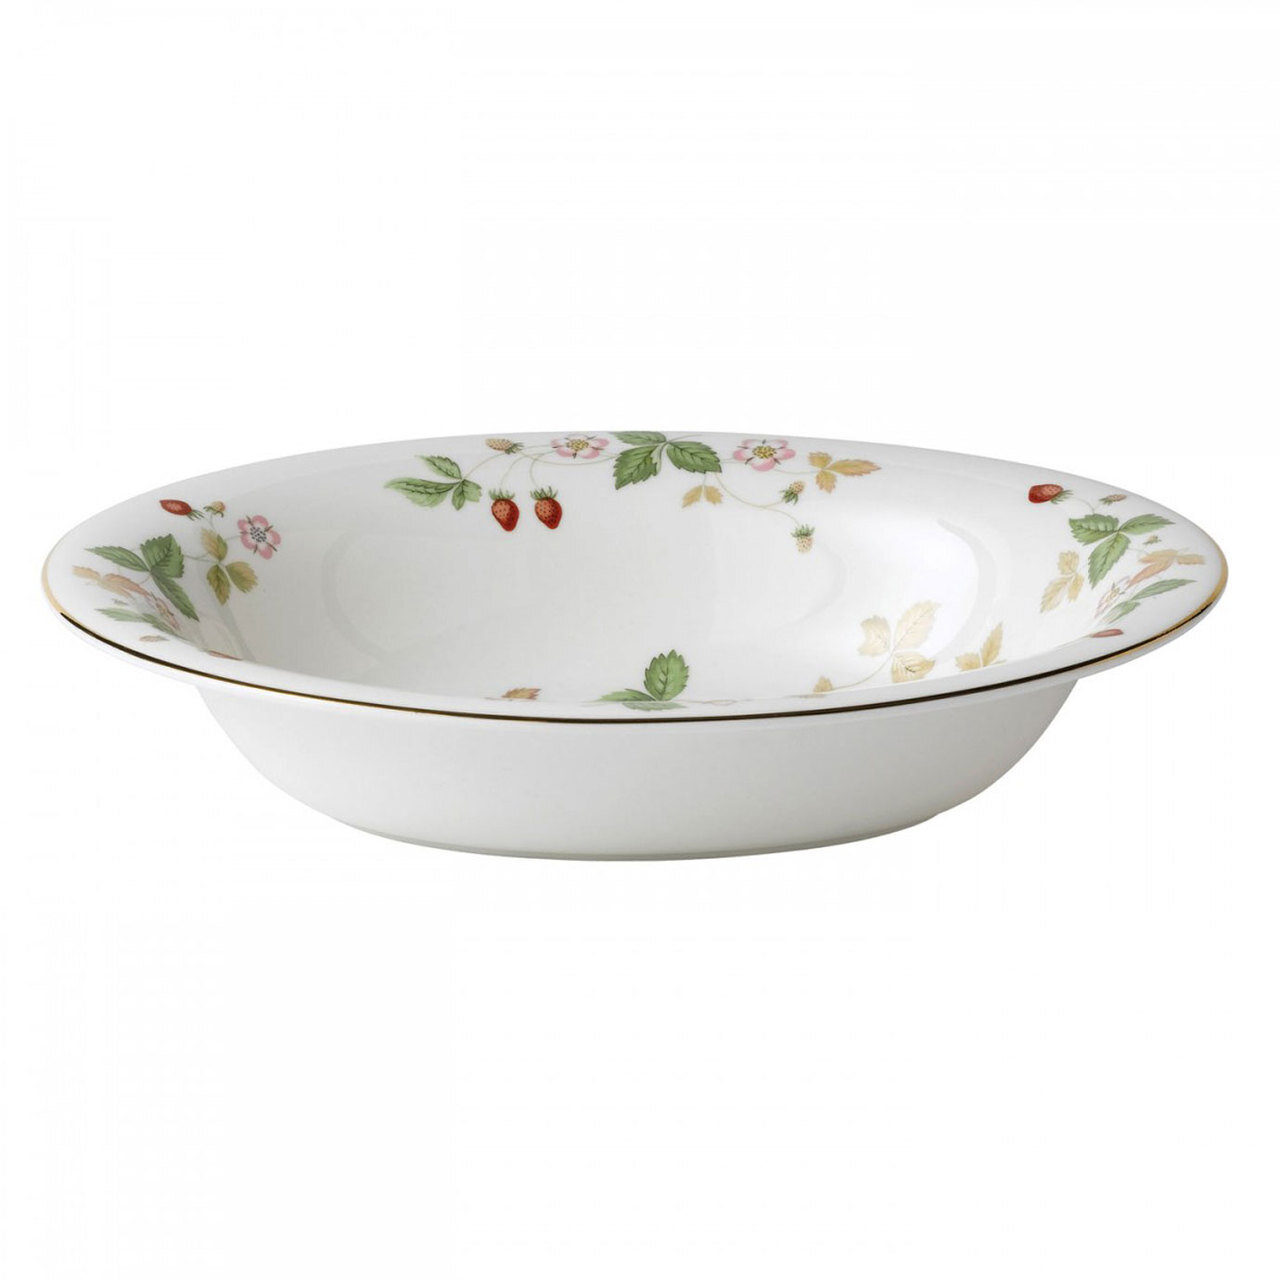 Wedgwood Wild Strawberry Open Vegetable Bowl Oval 9.75 Inch